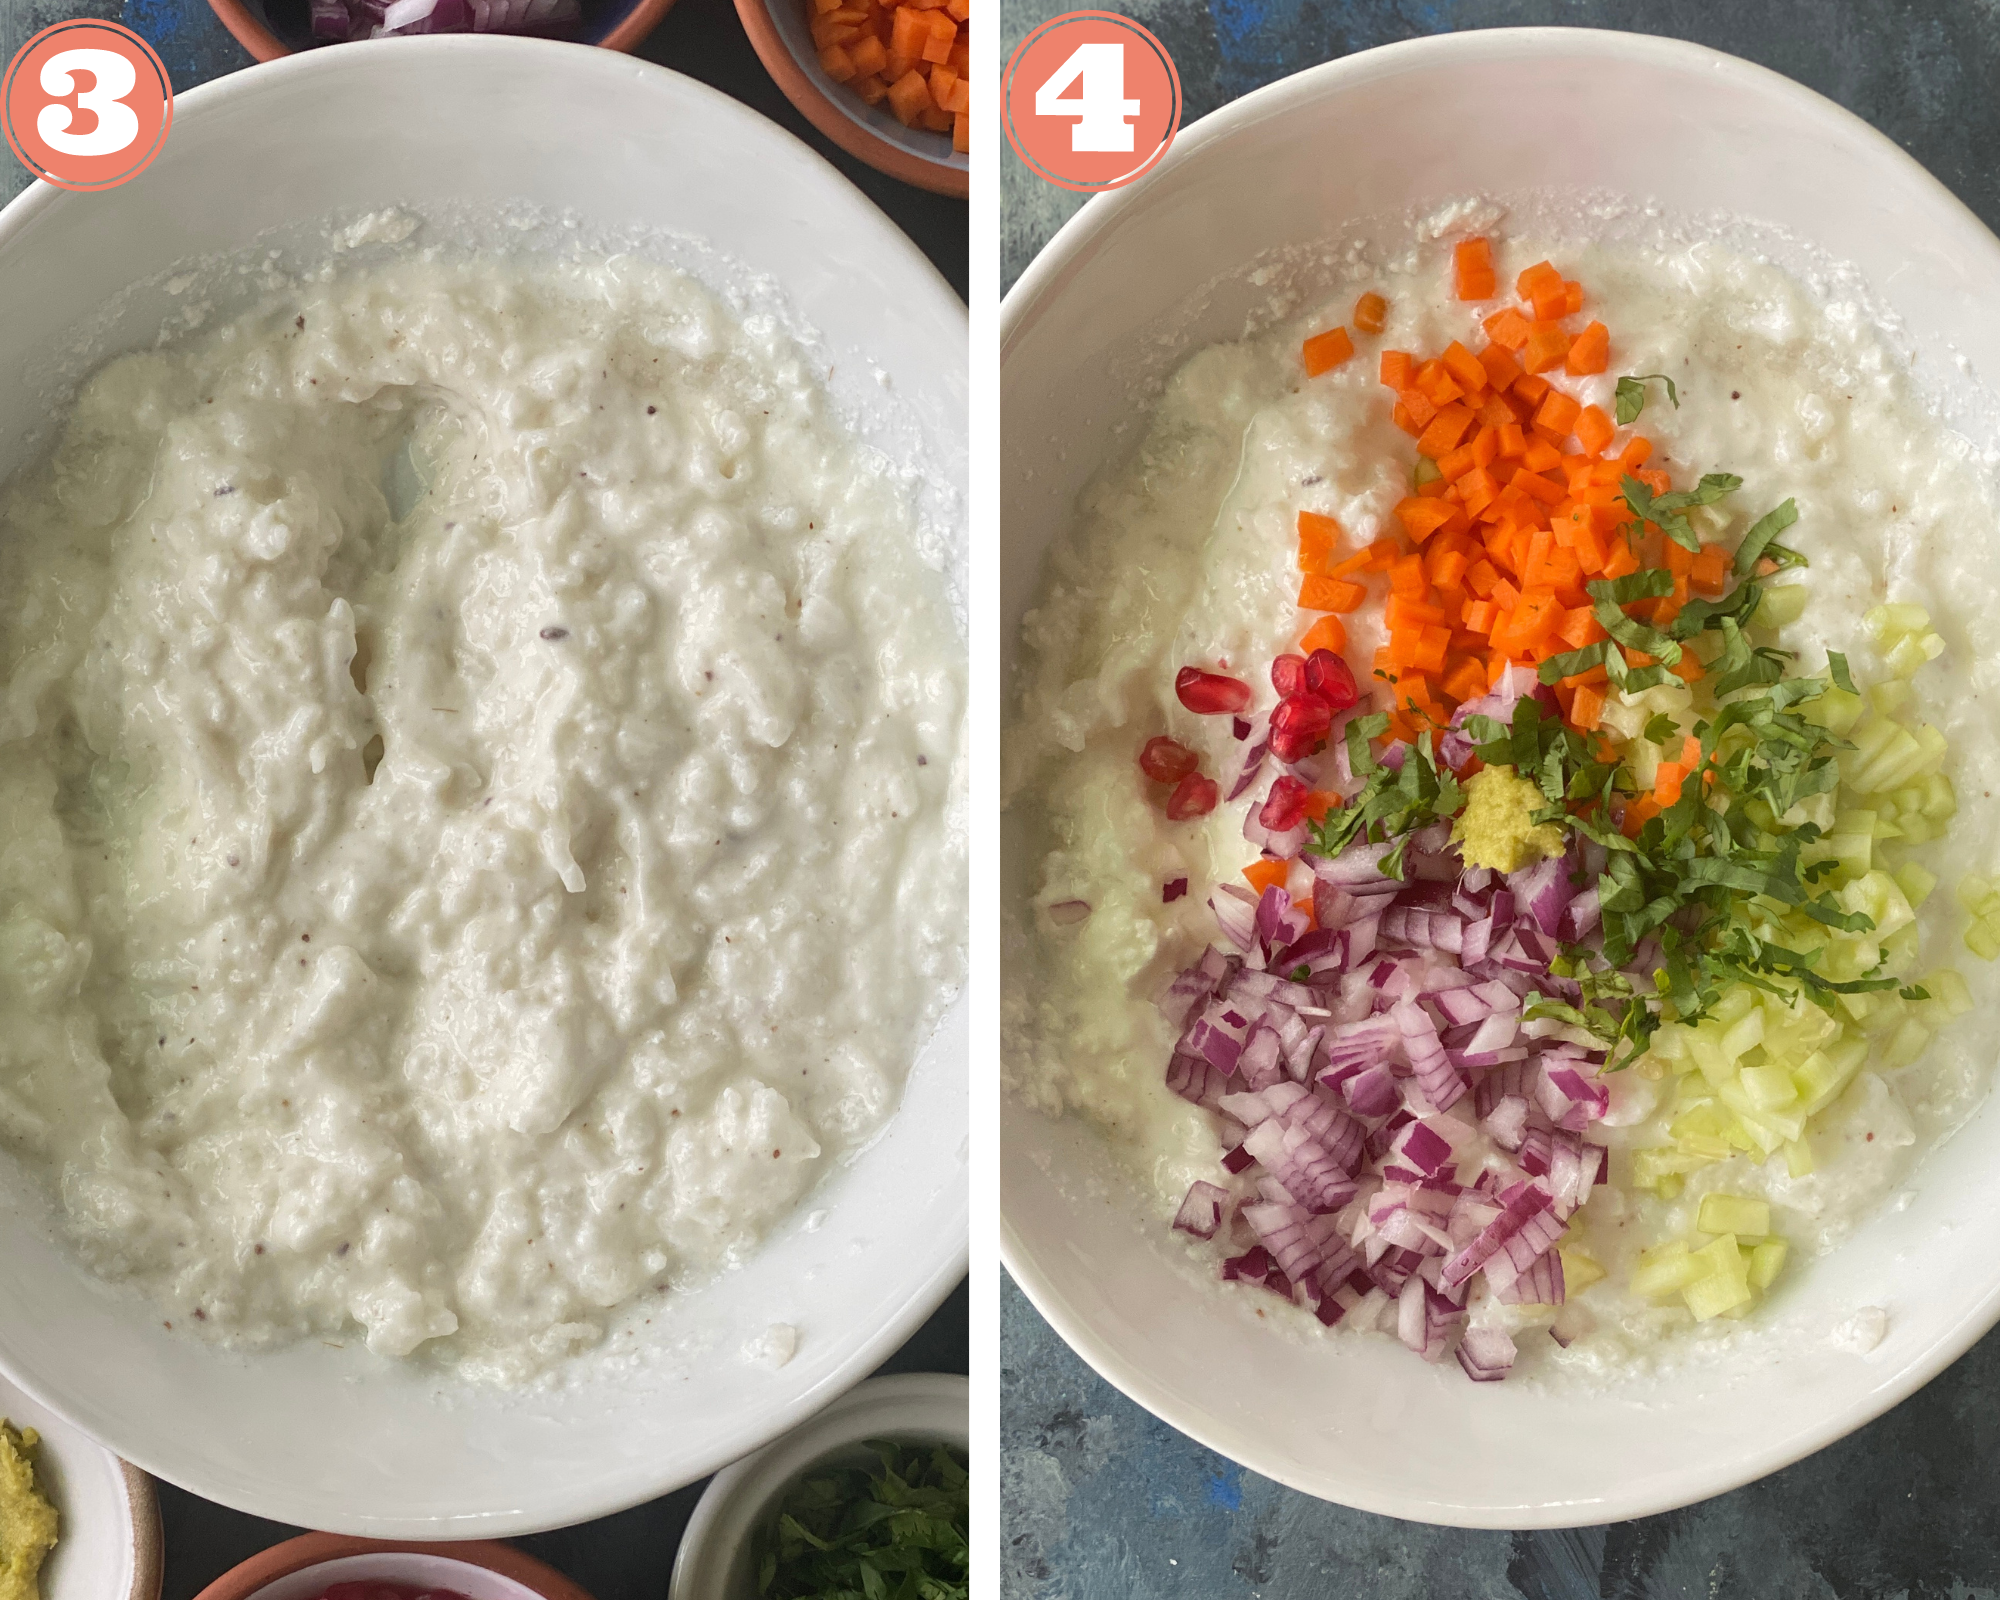 Mix and add vegetables like onions, carrots, cucumber and cilantro. 